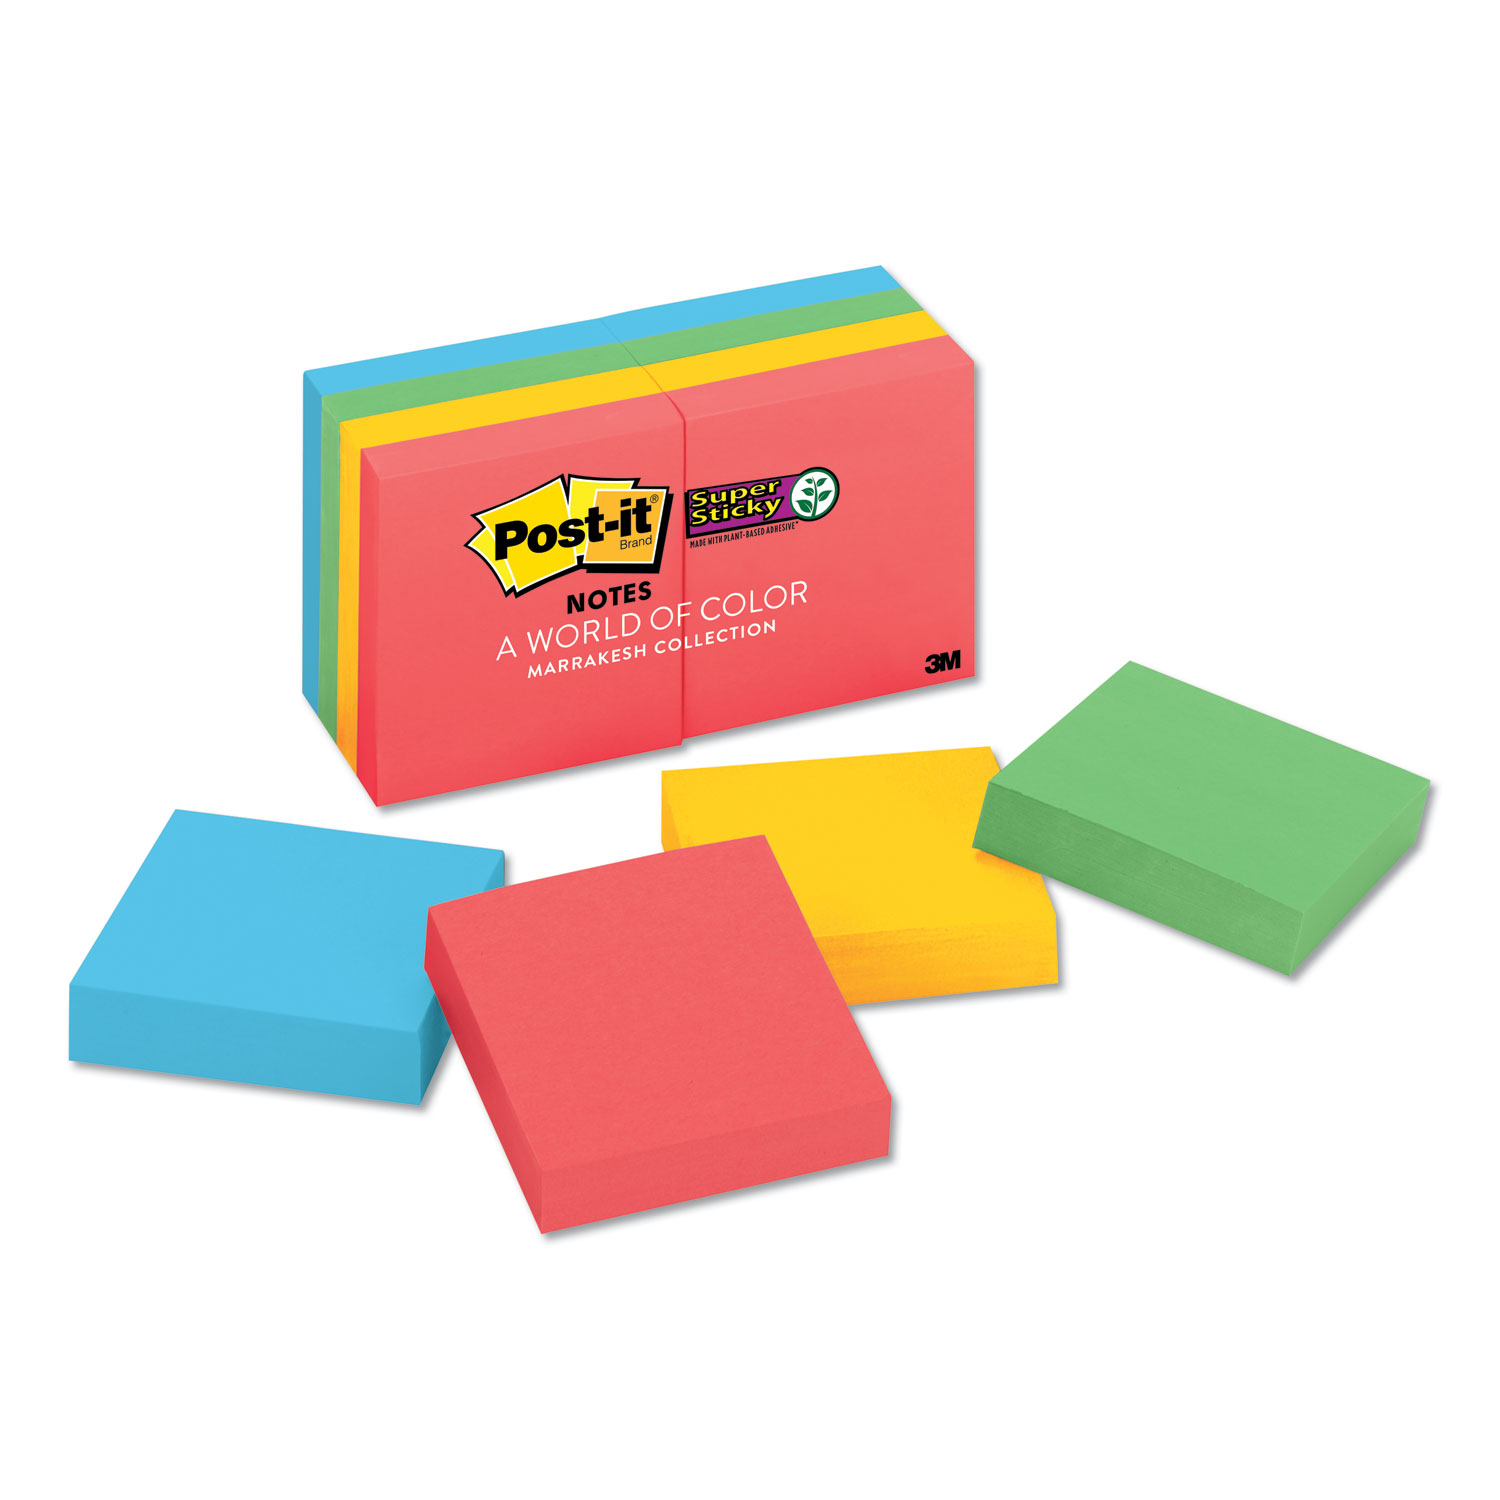  Post-it Notes Super Sticky 622-8SSAN Pads in Marrakesh Colors, 2 x 2, 90-Sheet, 8/Pack (MMM6228SSAN) 